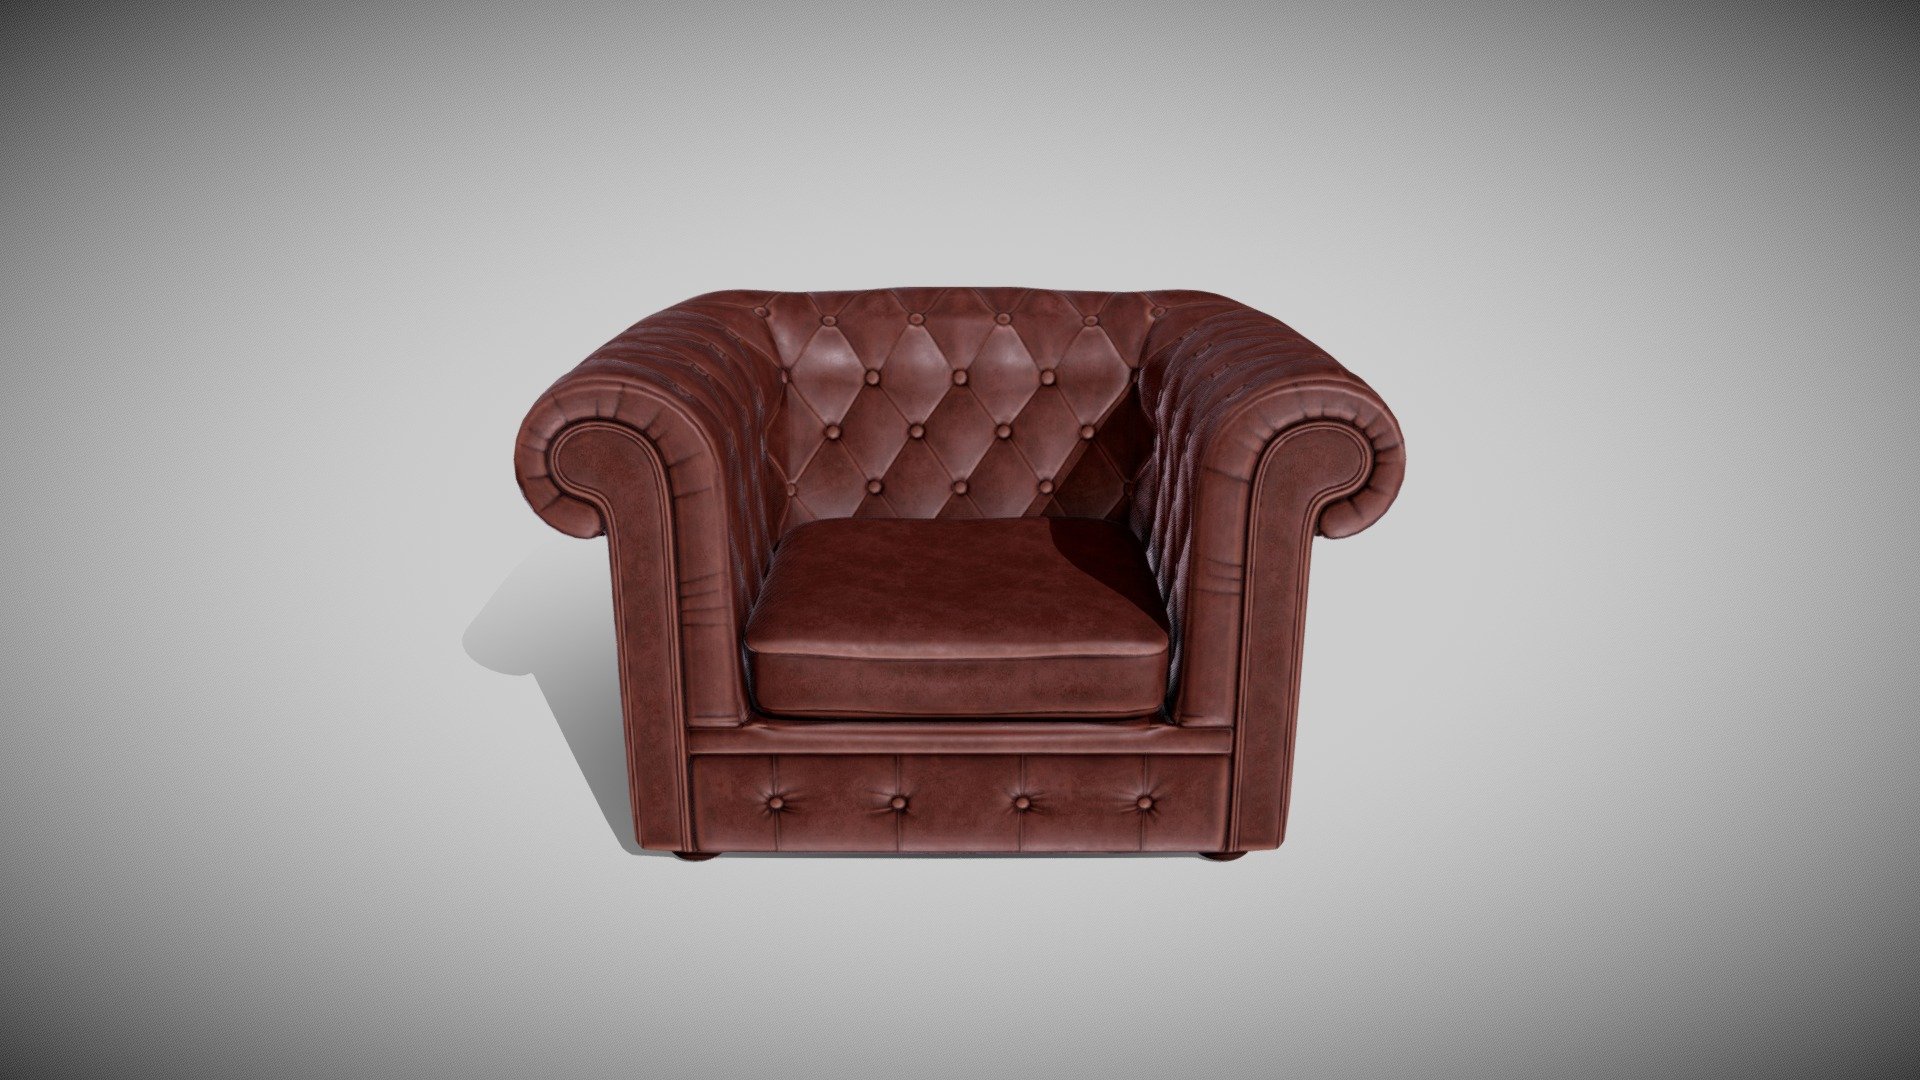 Ingame Sessel mit pbr textur - Chesterfield_Armchair - 3D model by DanielPeters 3d model